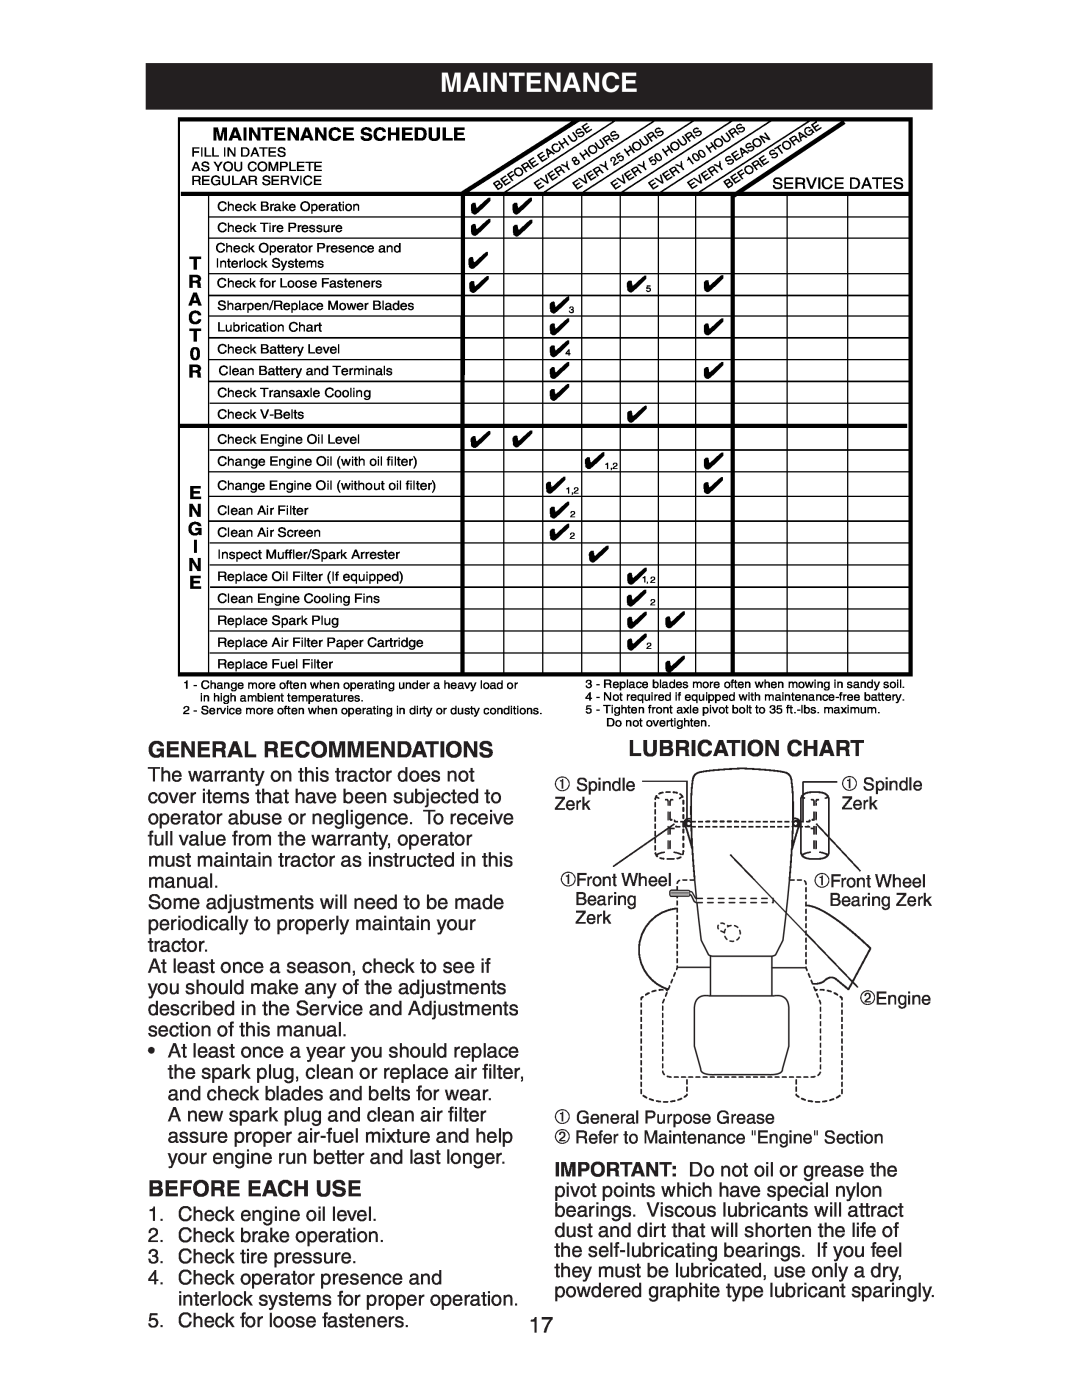 Electrolux AG15538B manual General Recommendations, Lubrication Chart, Before Each Use, Maintenance Schedule, ➁Engine 